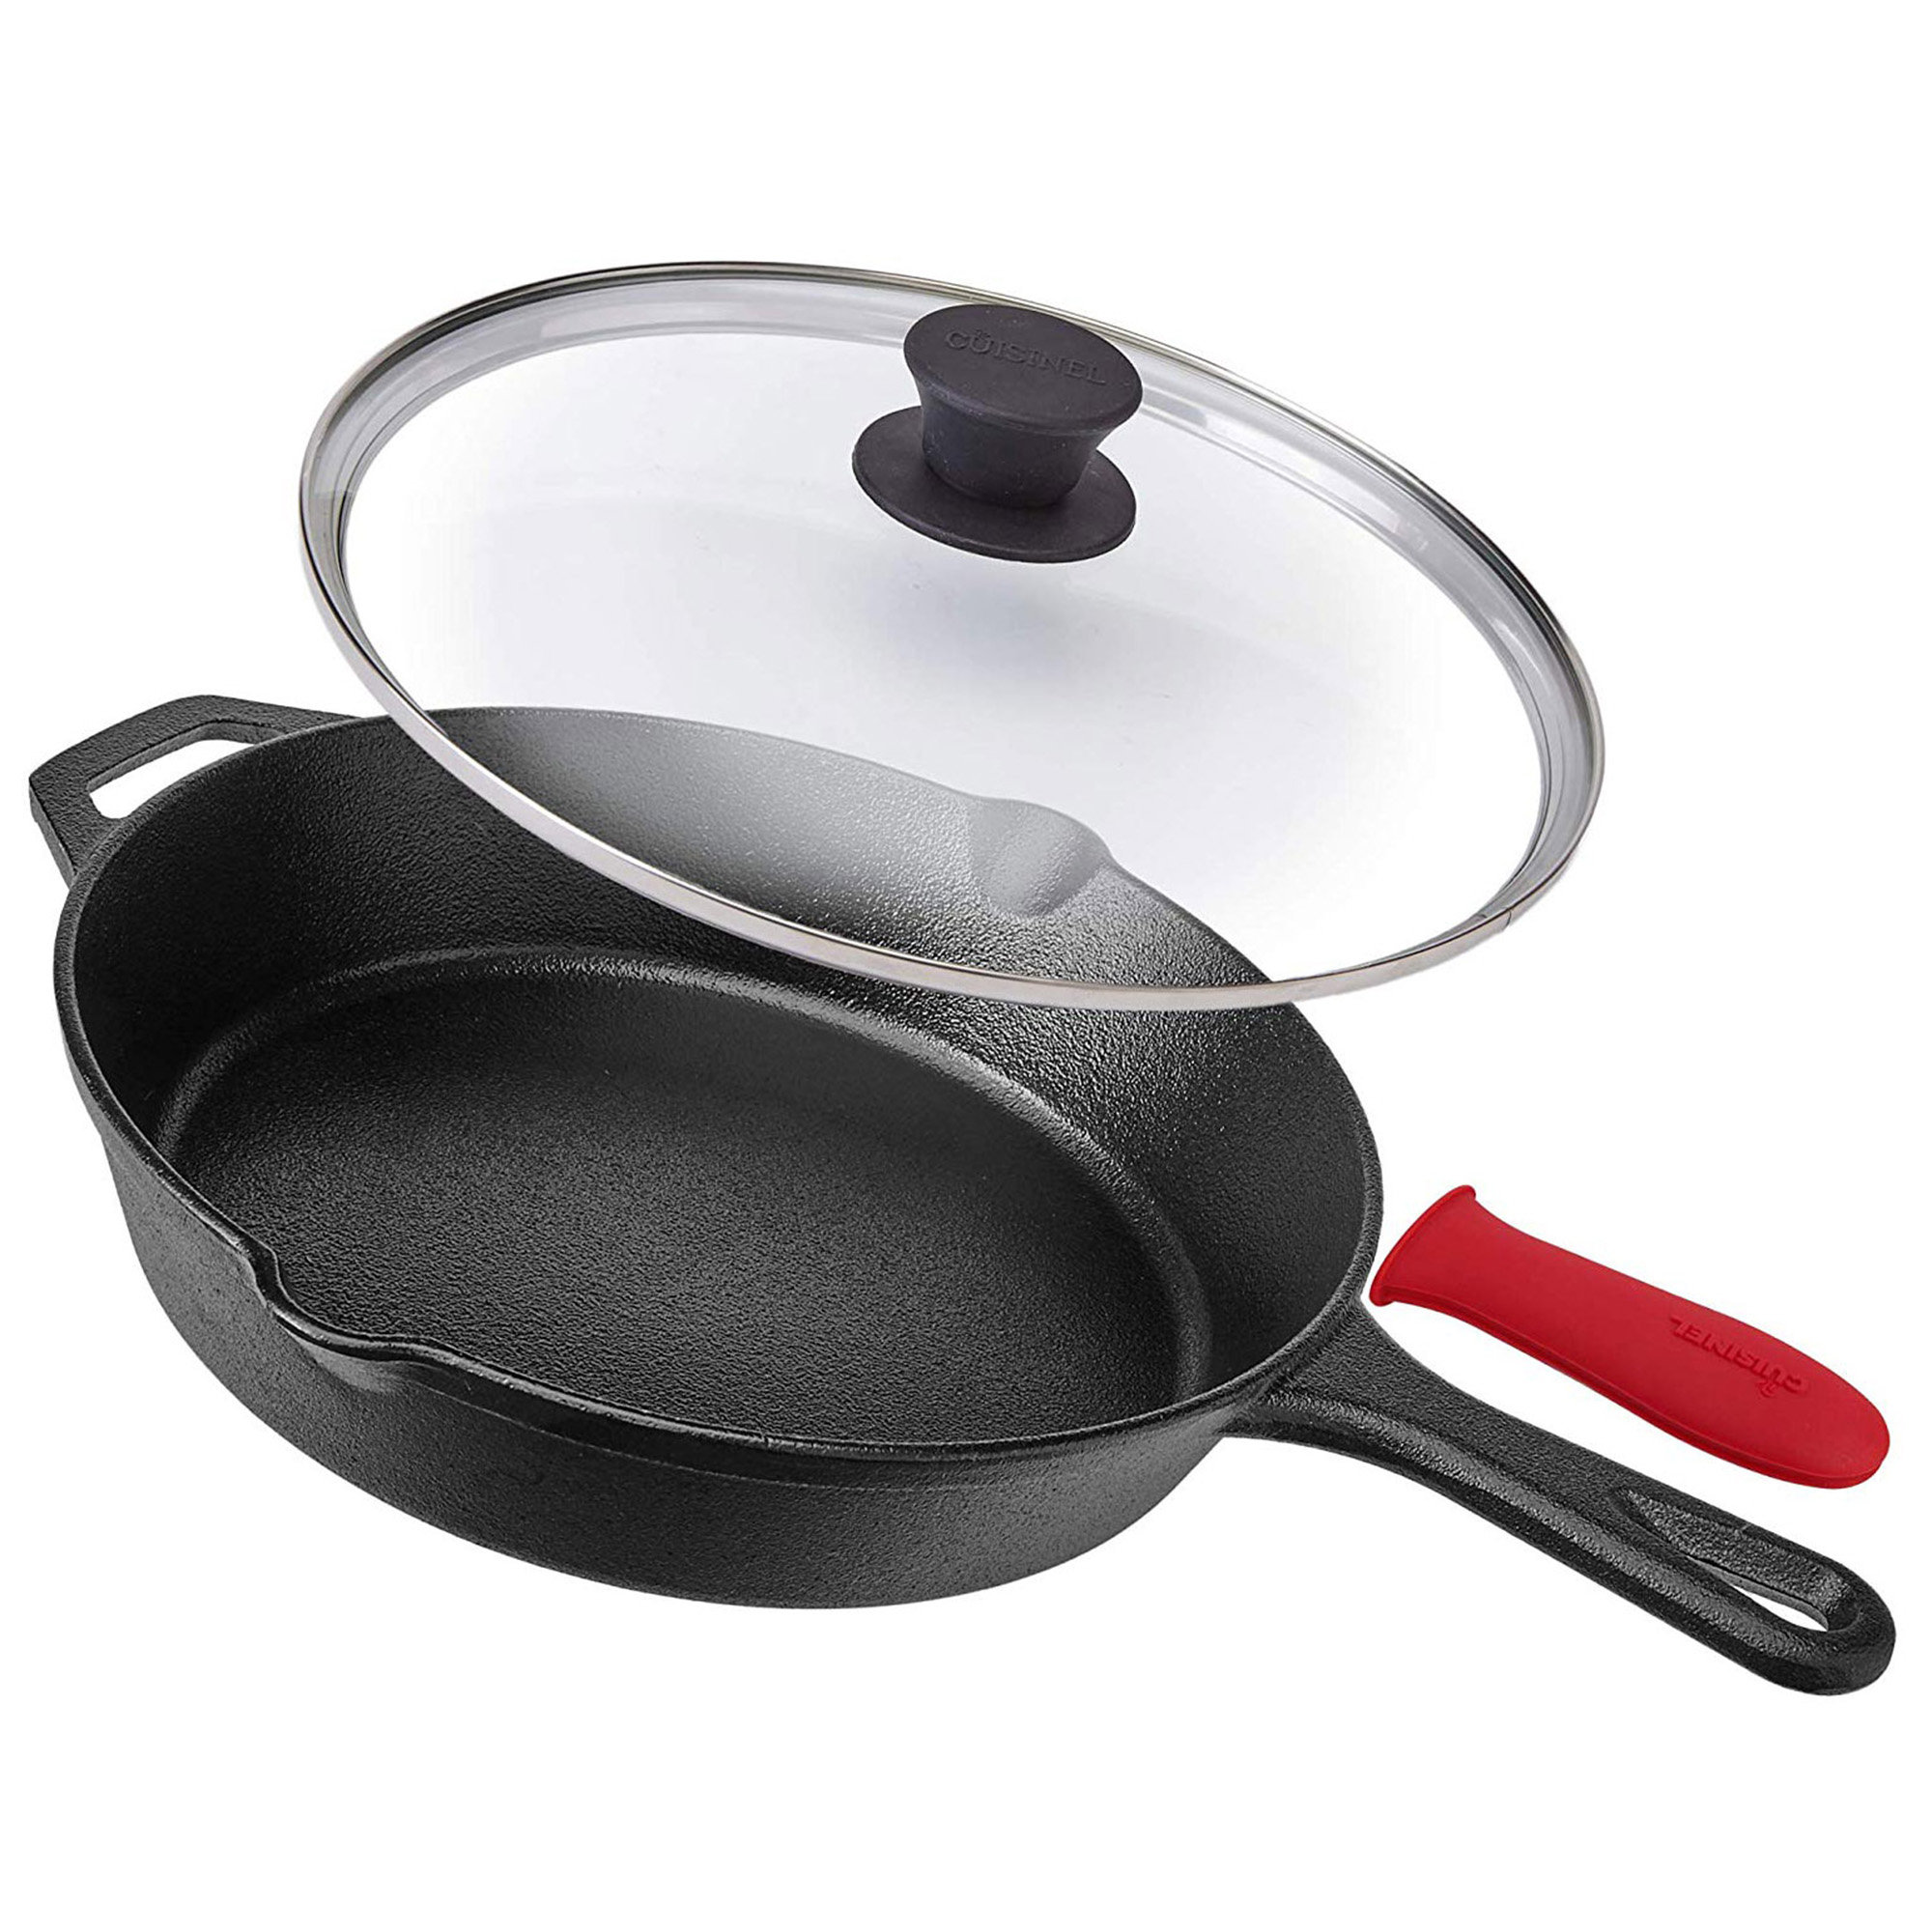 Lodge Cast Iron Pie Pan with Silicone Handles, 9.5, Black